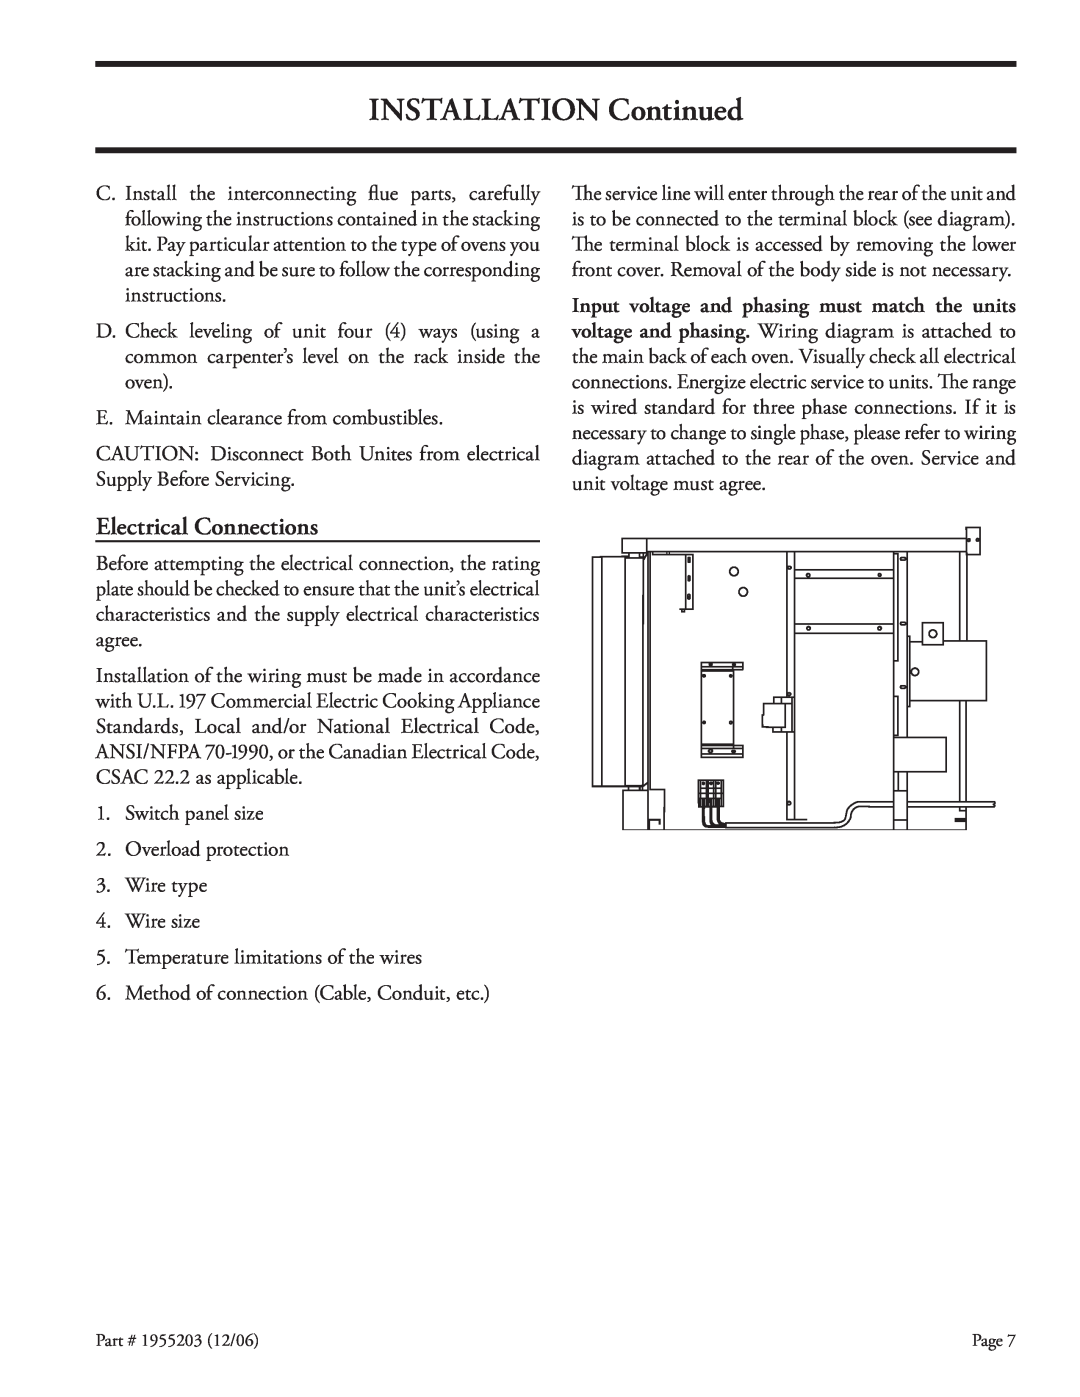 Garland Convection Microwave Oven installation instructions INSTALLATION Continued, Electrical Connections 